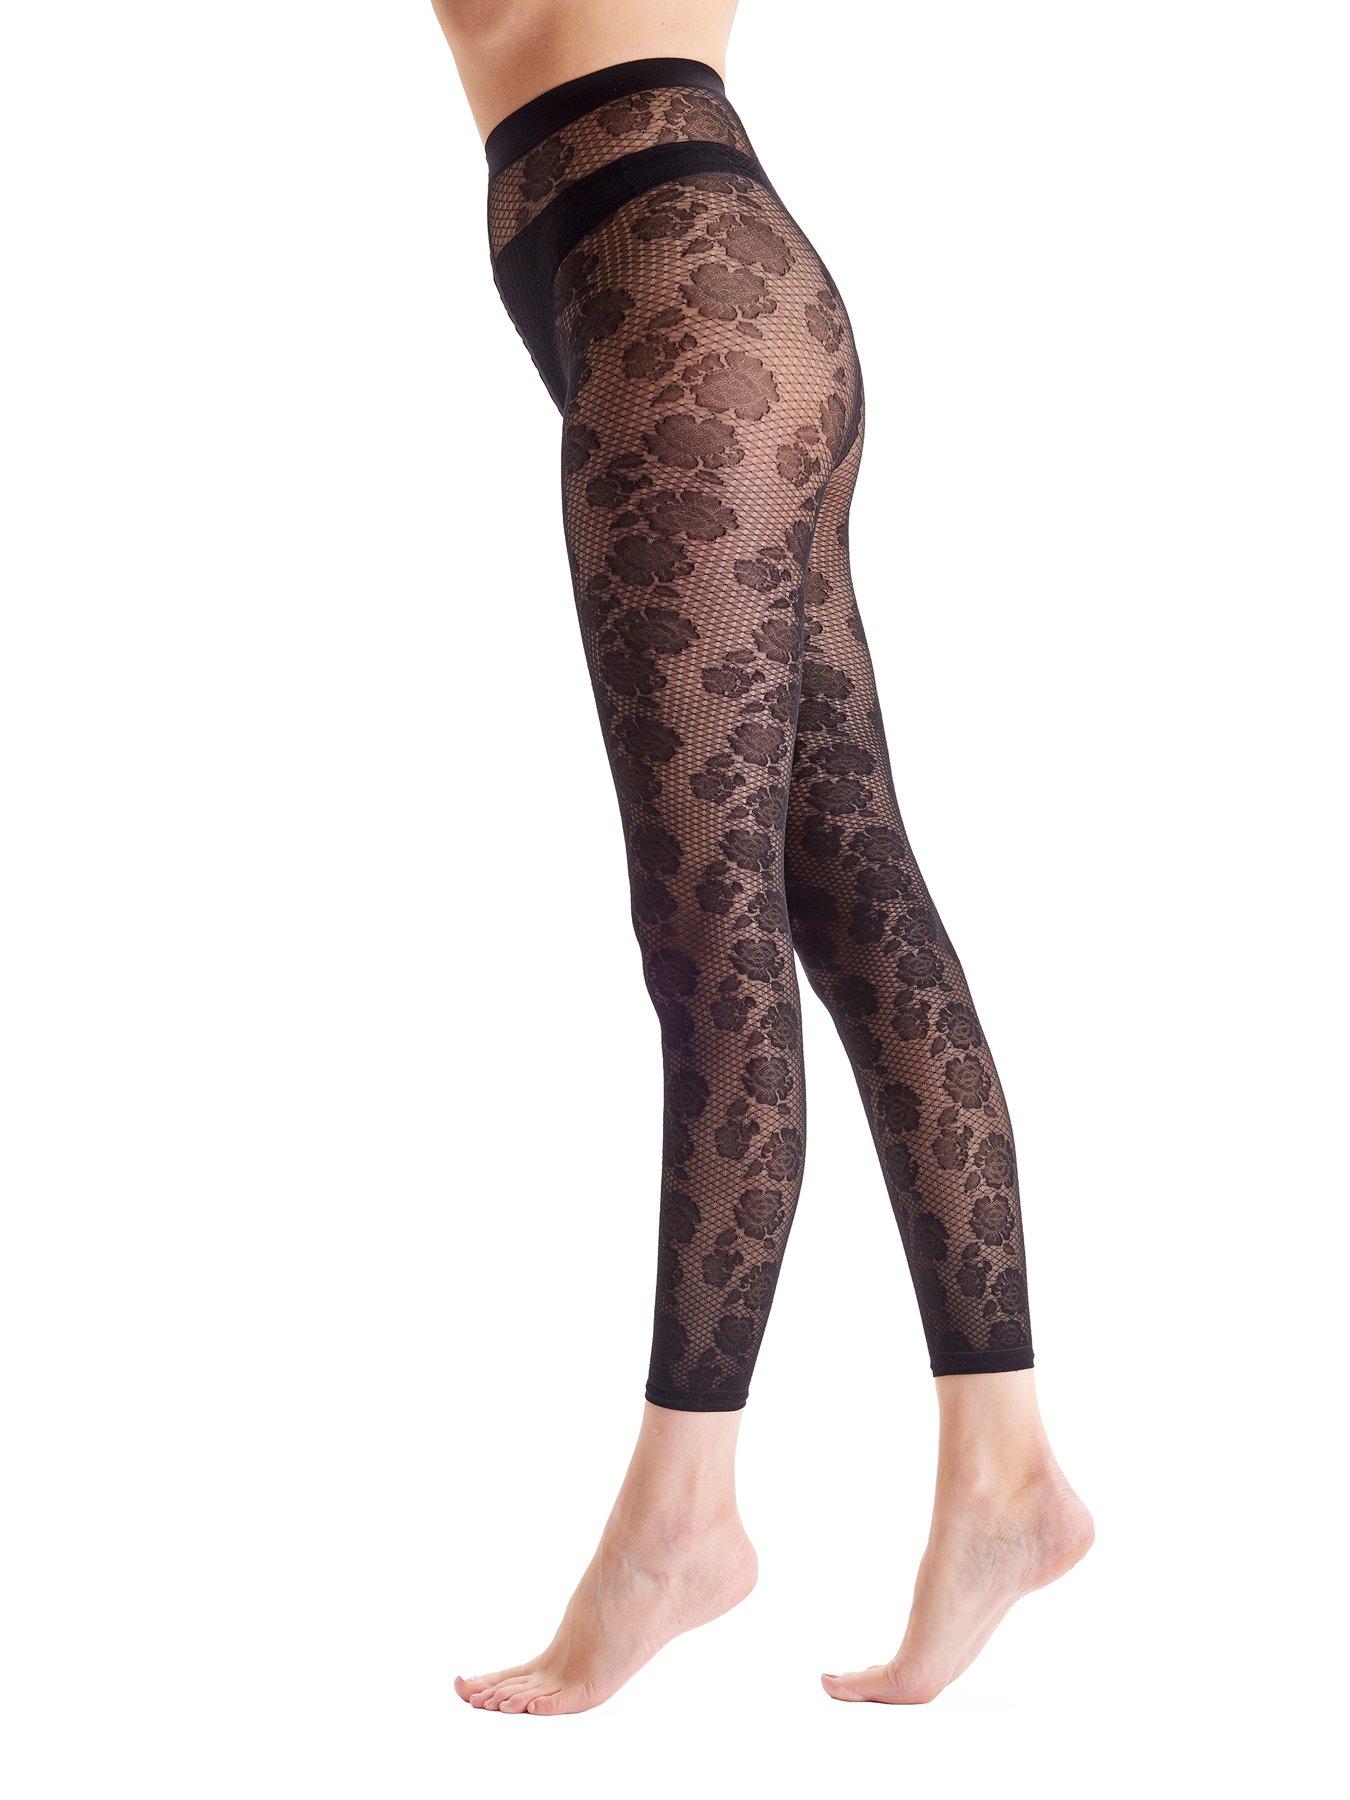 Pretty Polly Floral Footless Tights - Black